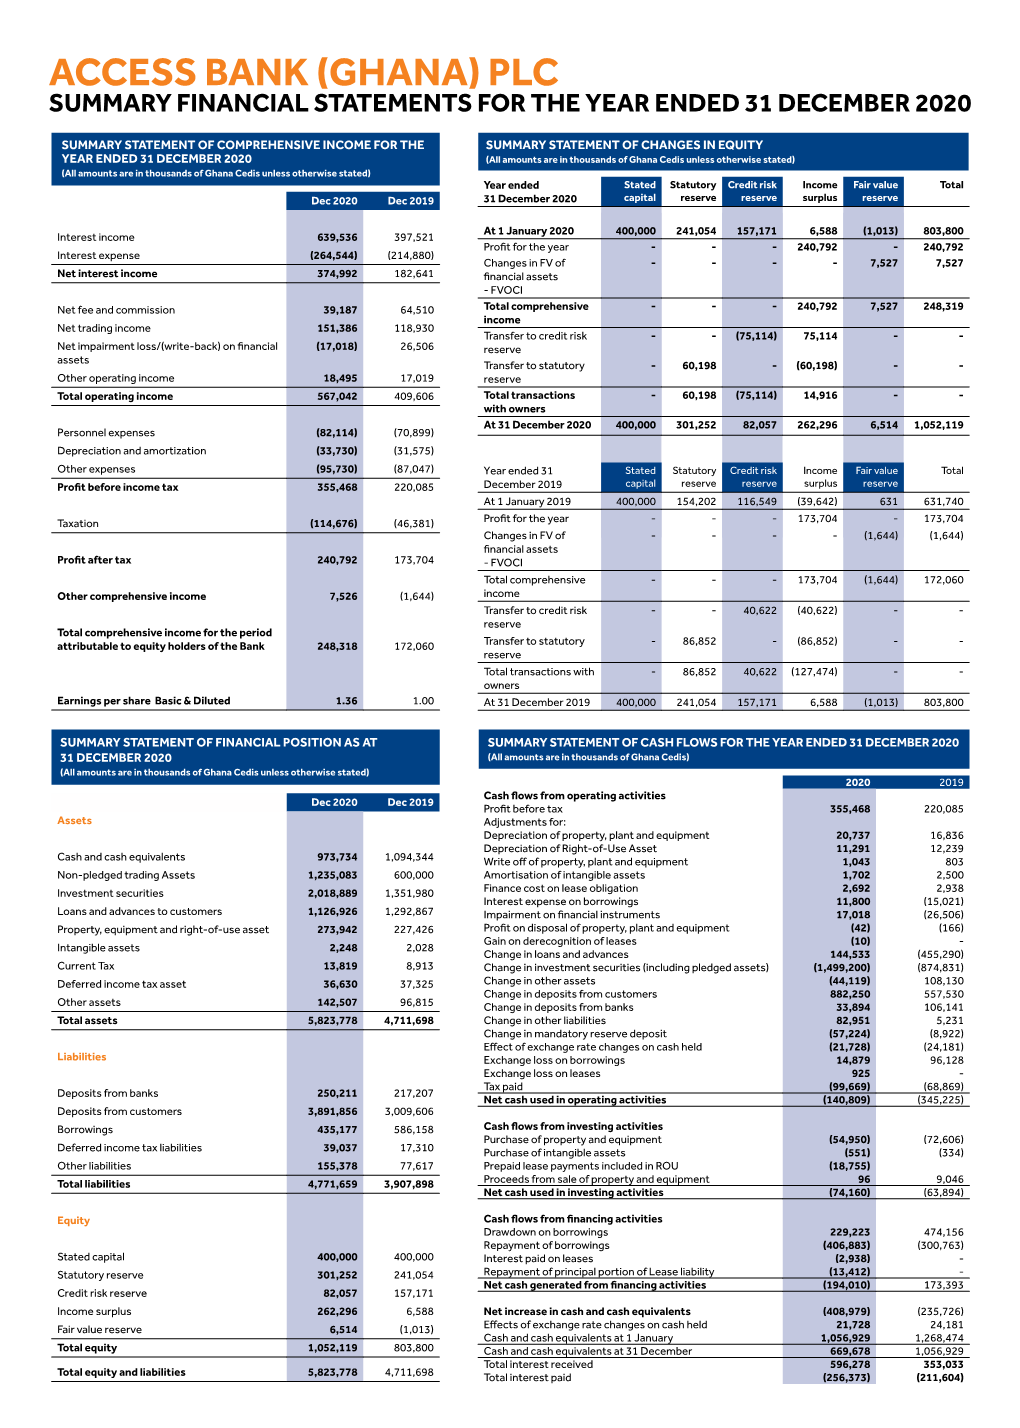 Access Bank (Ghana) Plc Summary Financial Statements for the Year Ended 31 December 2020